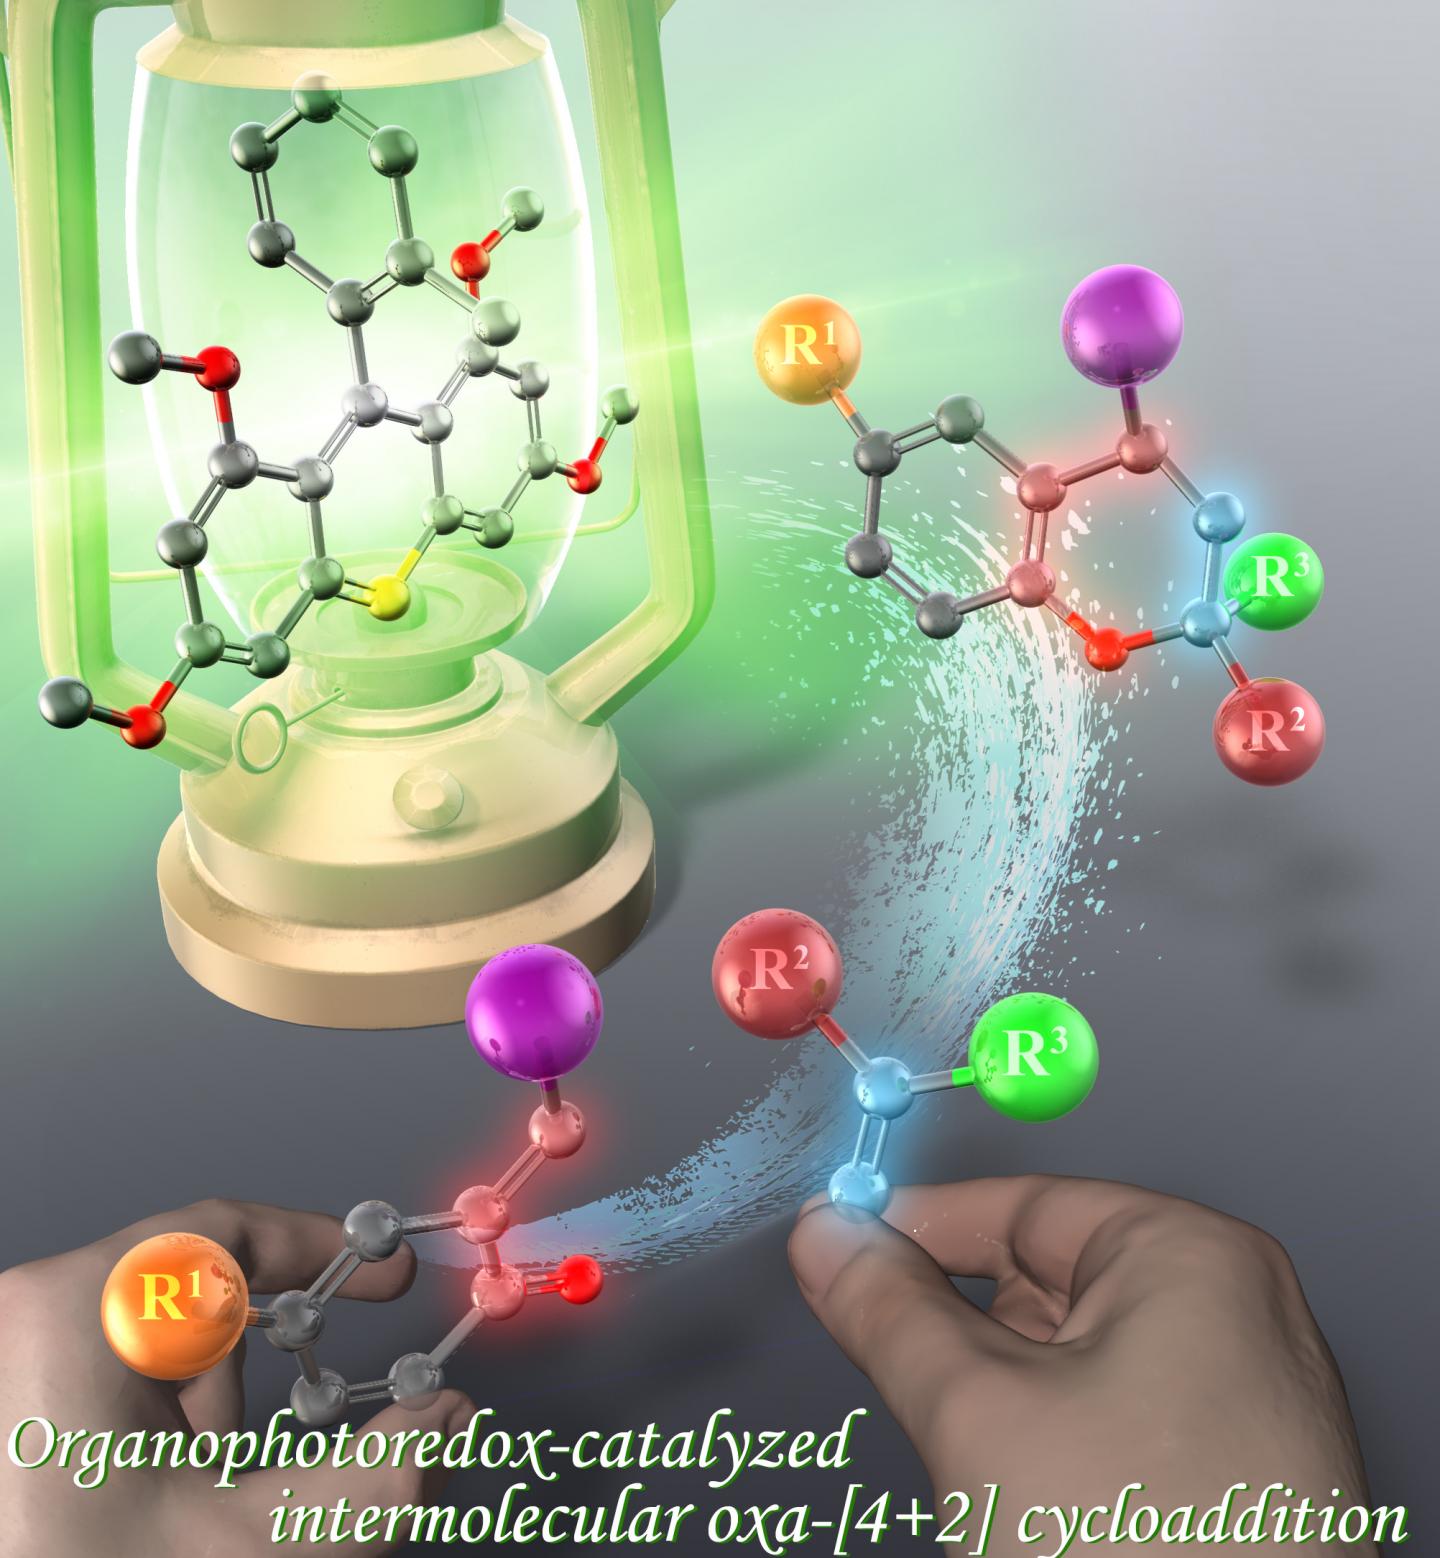 Let There Be Light: Synthesizing Organic Compounds